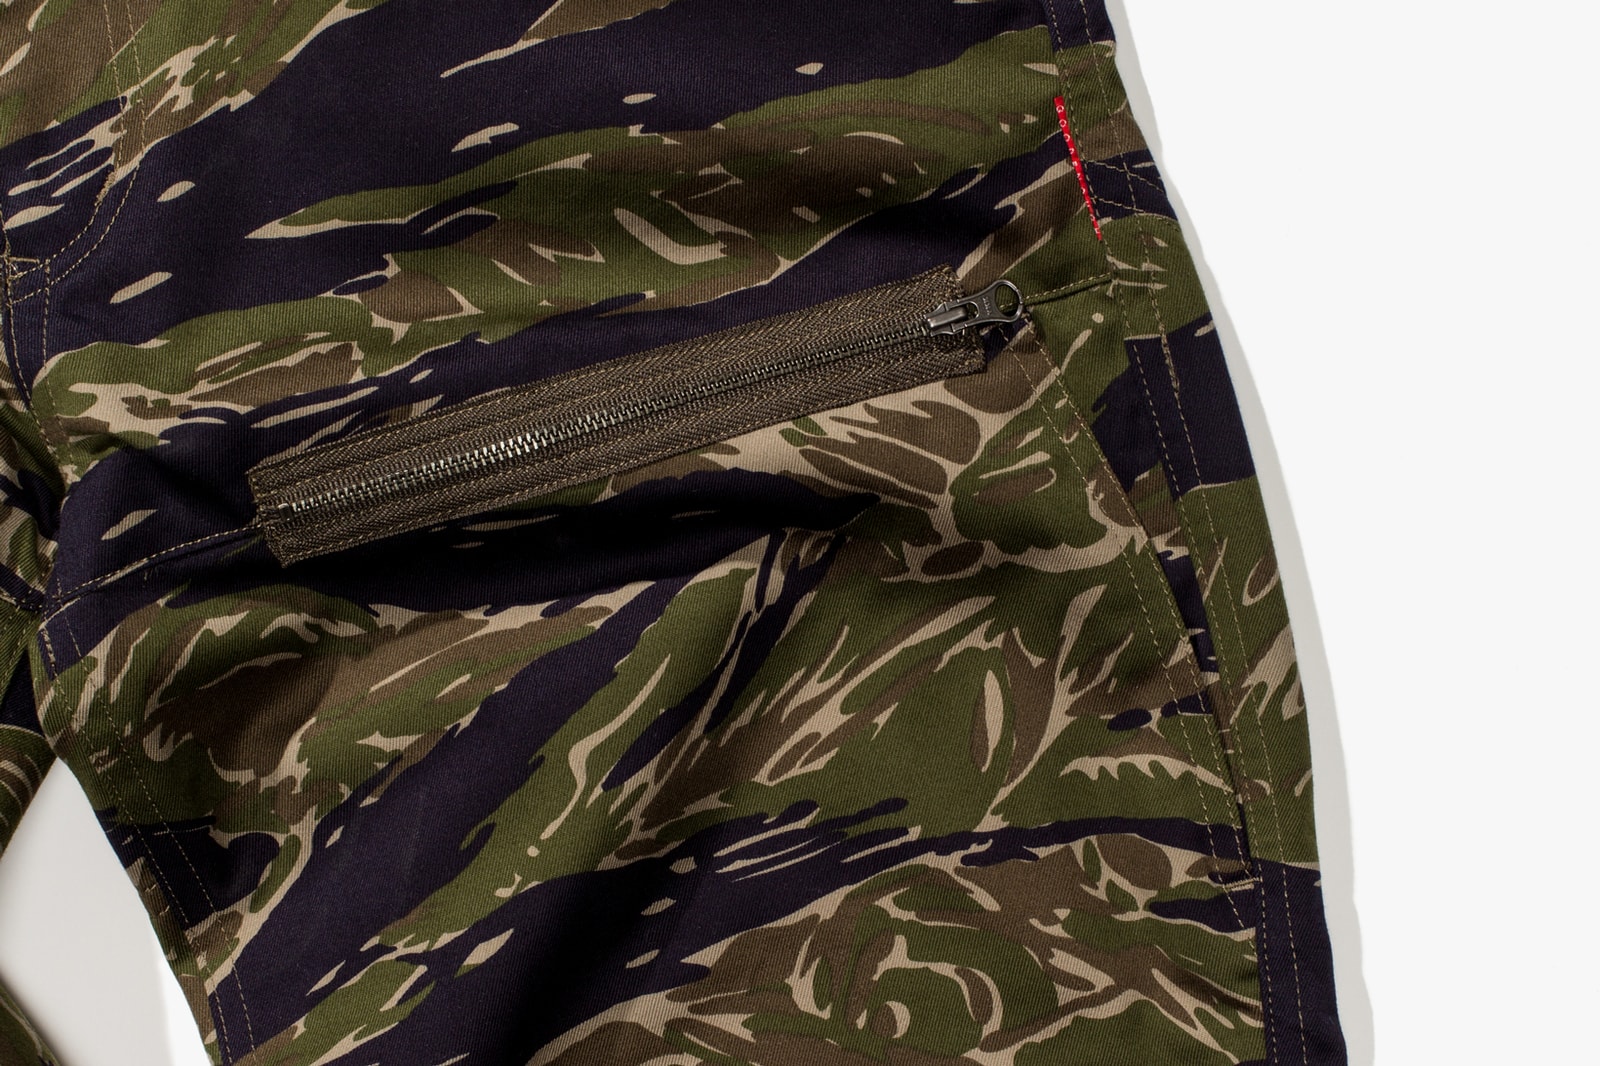 UNDEFEATED x GOODENOUGH Tiger Camo Capsule | HYPEBEAST